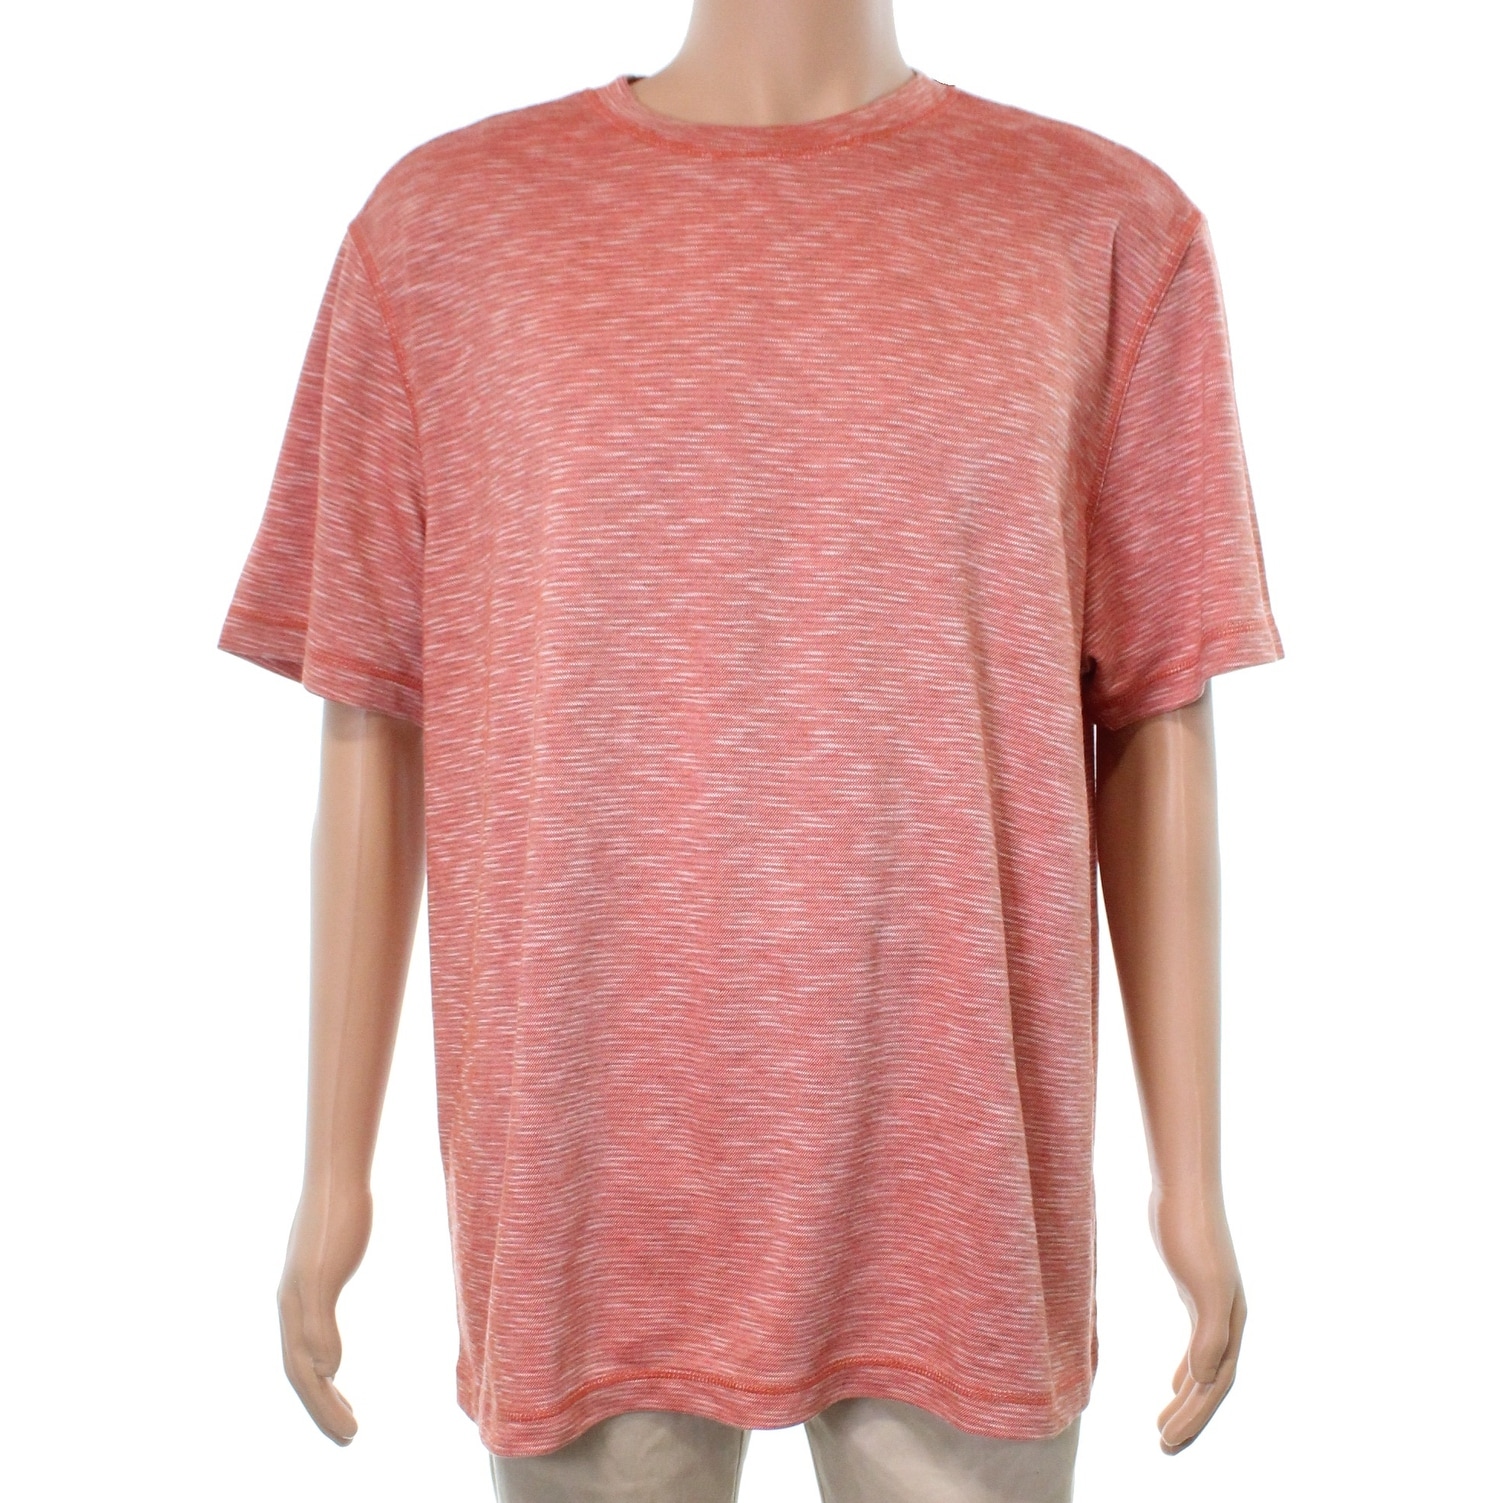 red flame shirts mens